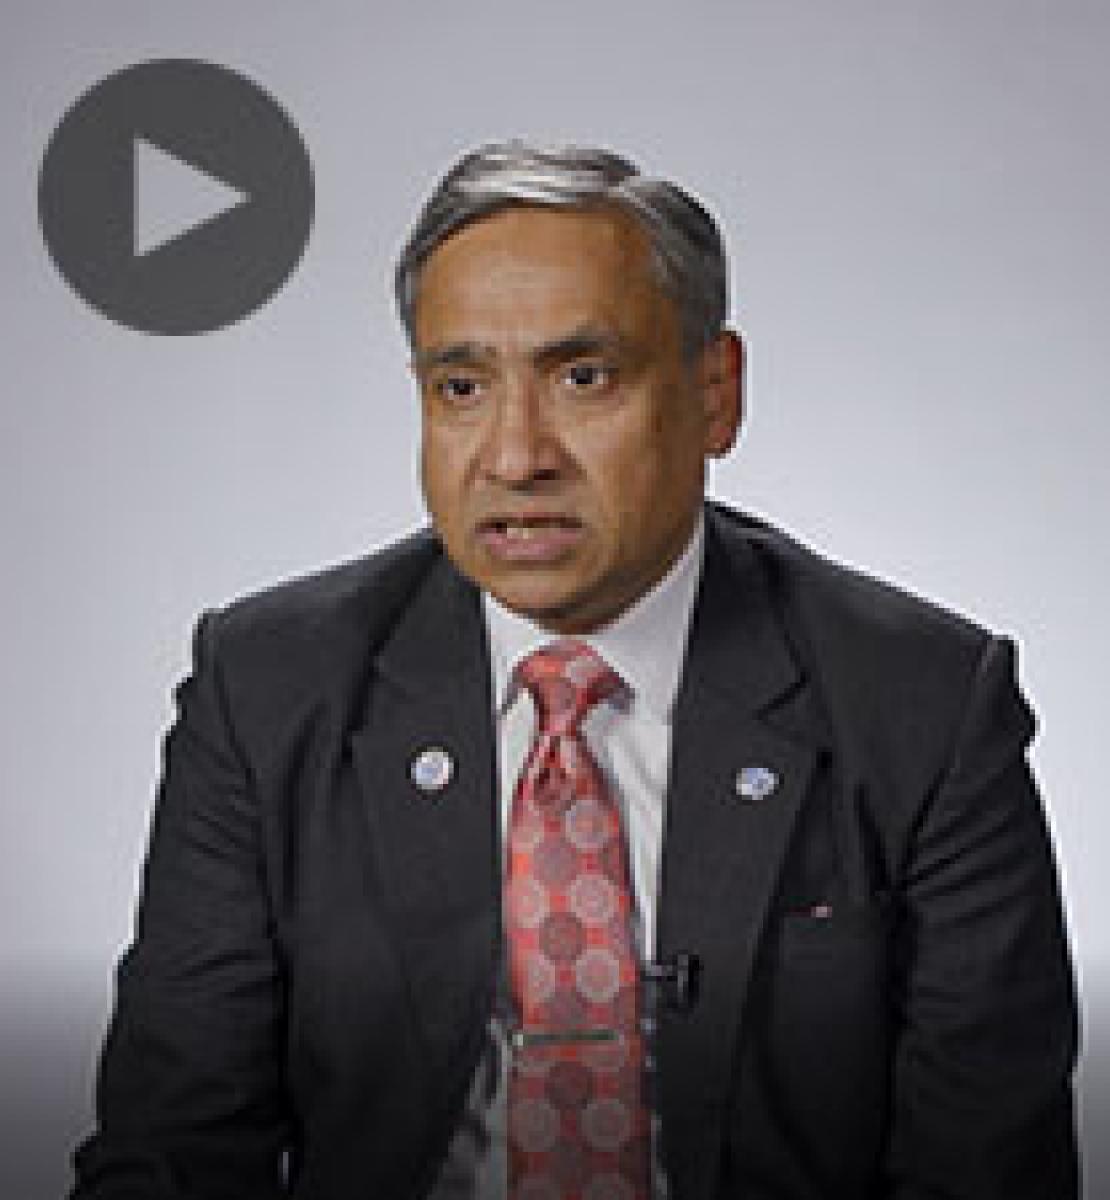 Screenshot from video message shows Resident Coordinator, Tapan Mishra